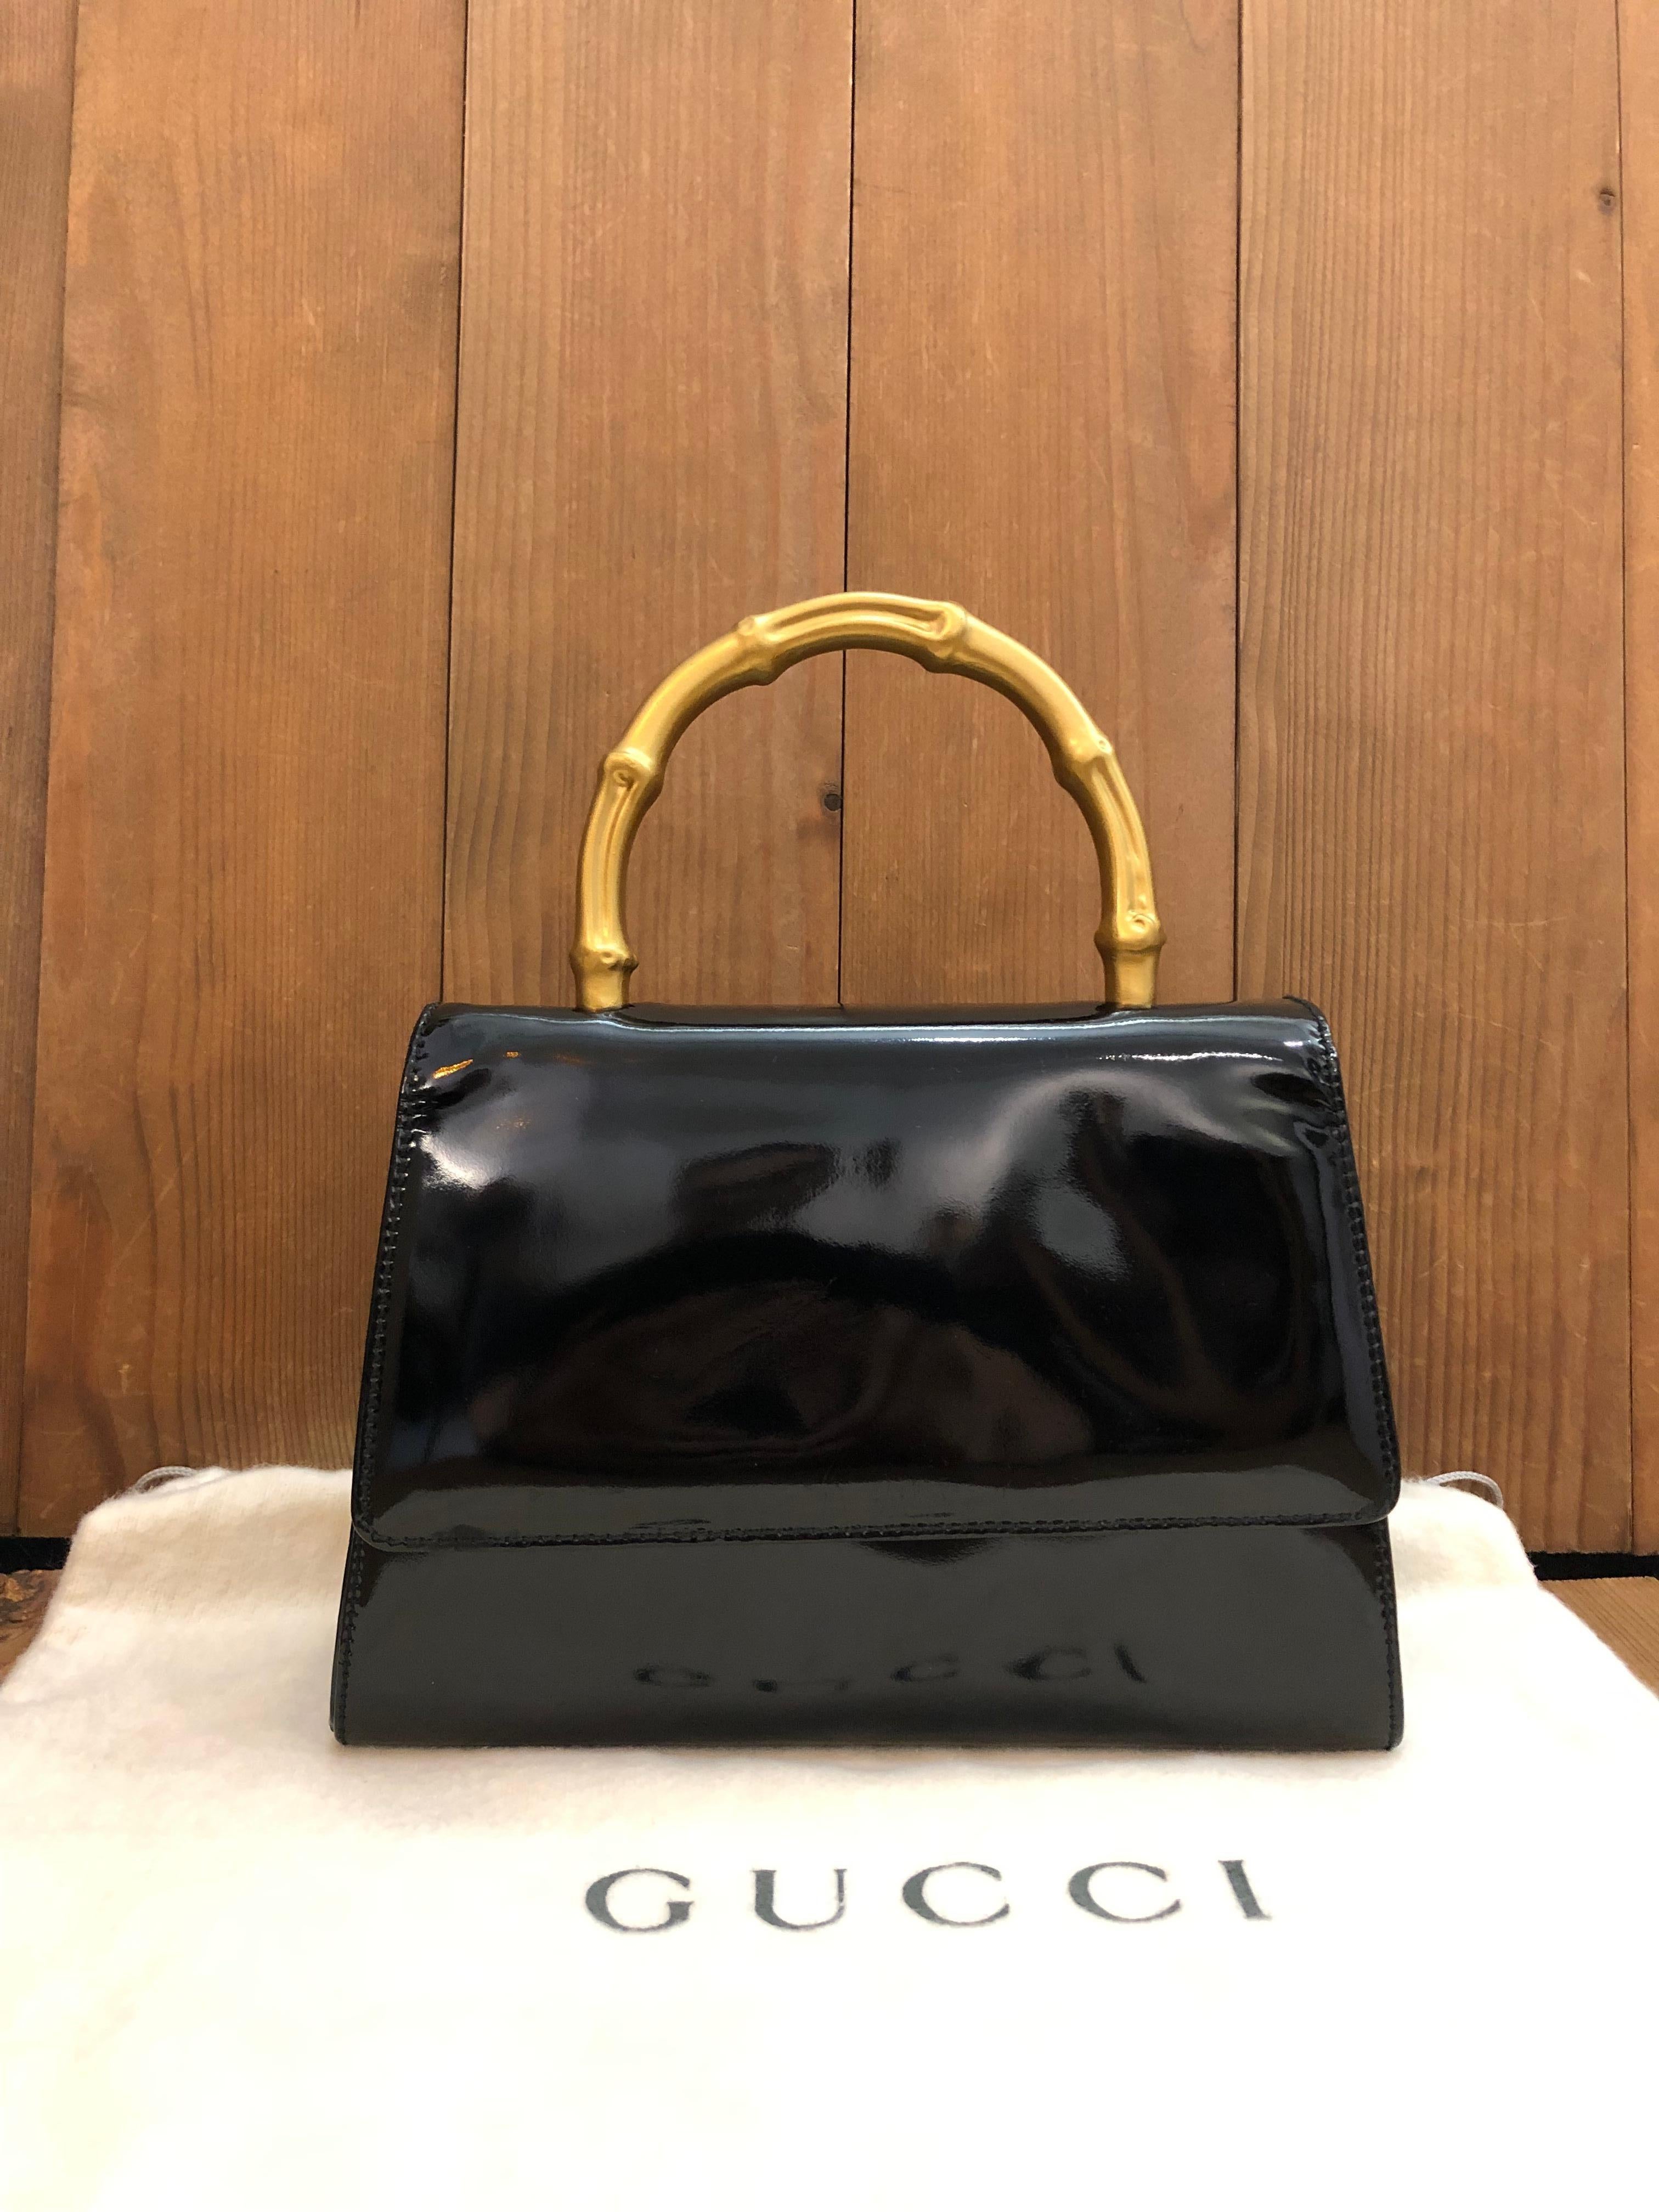 This exquisite 1990s vintage GUCCI mini handbag is crafted of patent leather in black featuring a gold toned bamboo ring handle. Front flap magnetic snap closure opens to a suede/silk satin interior featuring a patch pocket. Made in Italy. Measures